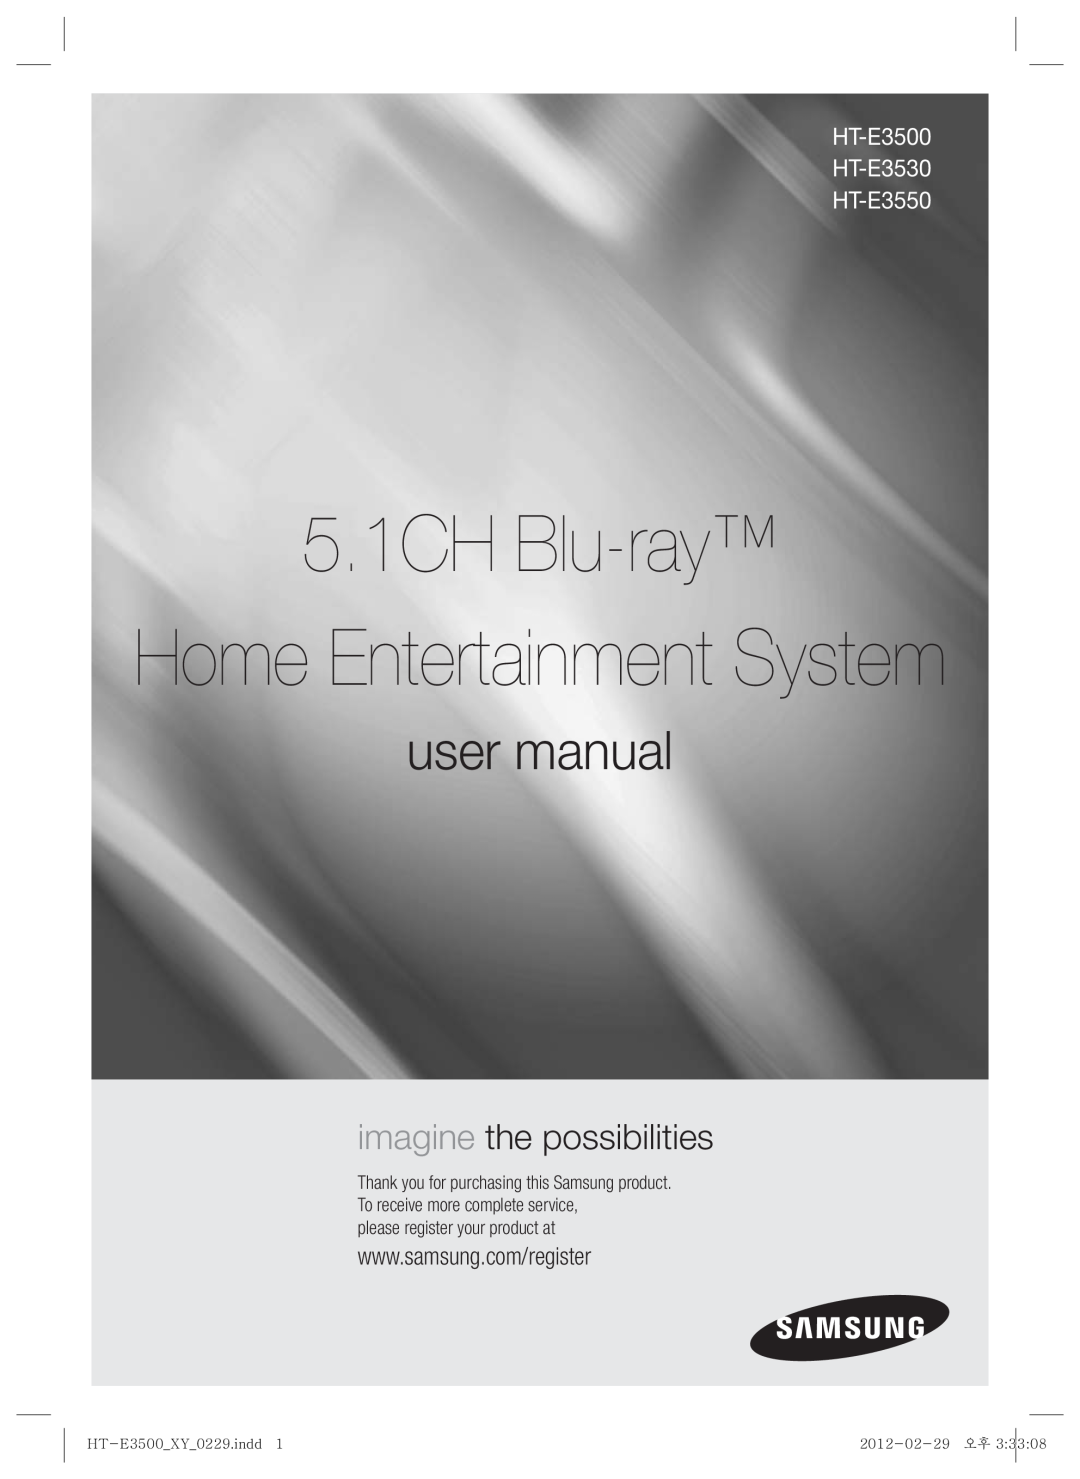 Samsung HT-E3550 user manual 5.1CH Blu-ray, Home Entertainment System, imagine the possibilities, HT-E3500 XY 0229.indd1 